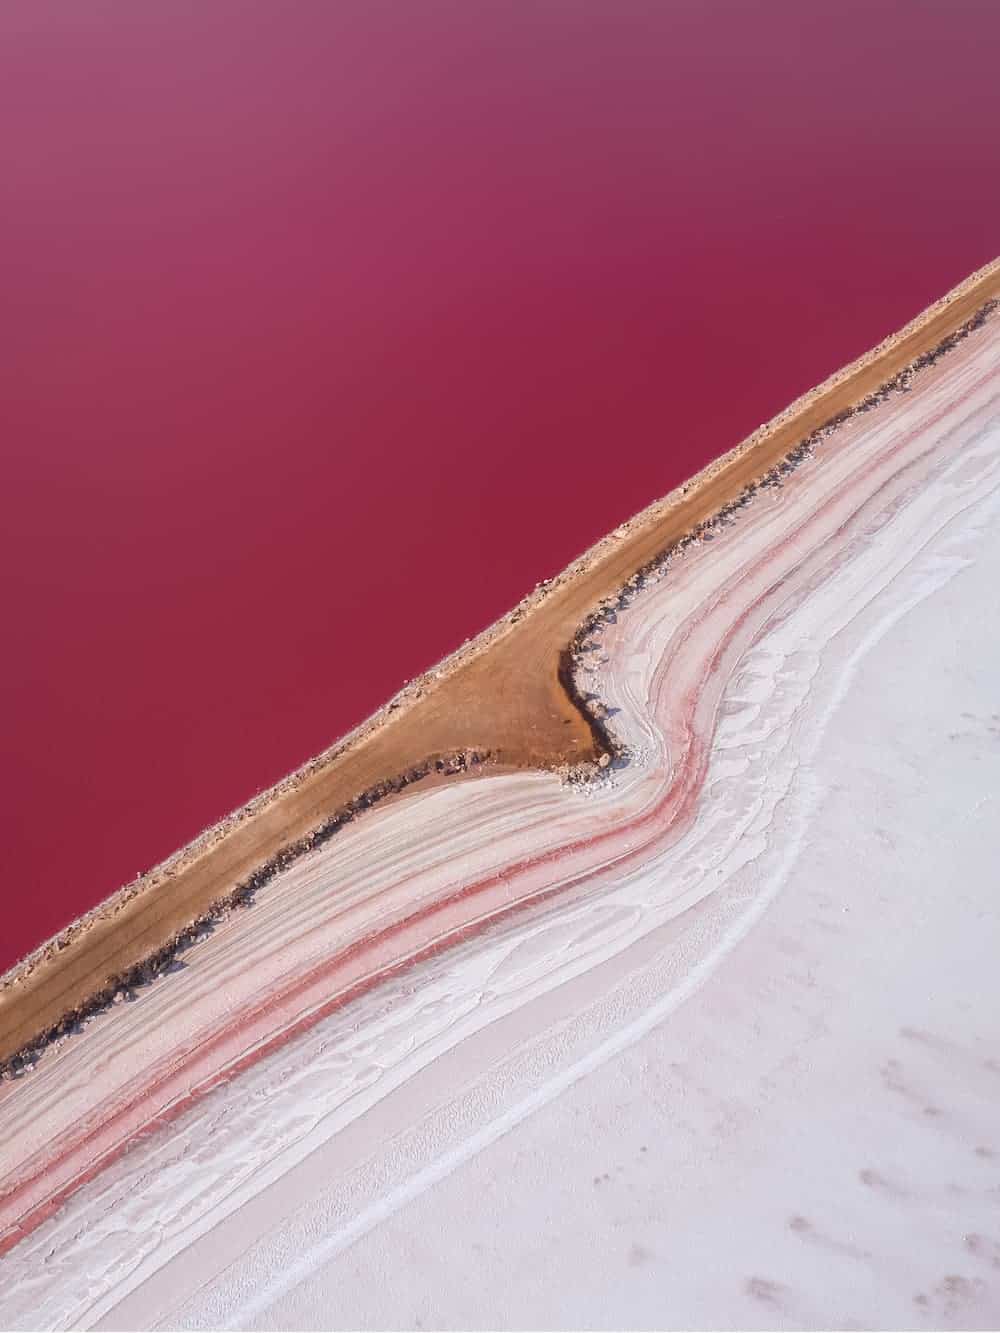 Aerial view of Hutt Lagoon's vibrant pink waters divided by a narrow earthen causeway, with salt deposits creating textured white and pink patterns along the edges.